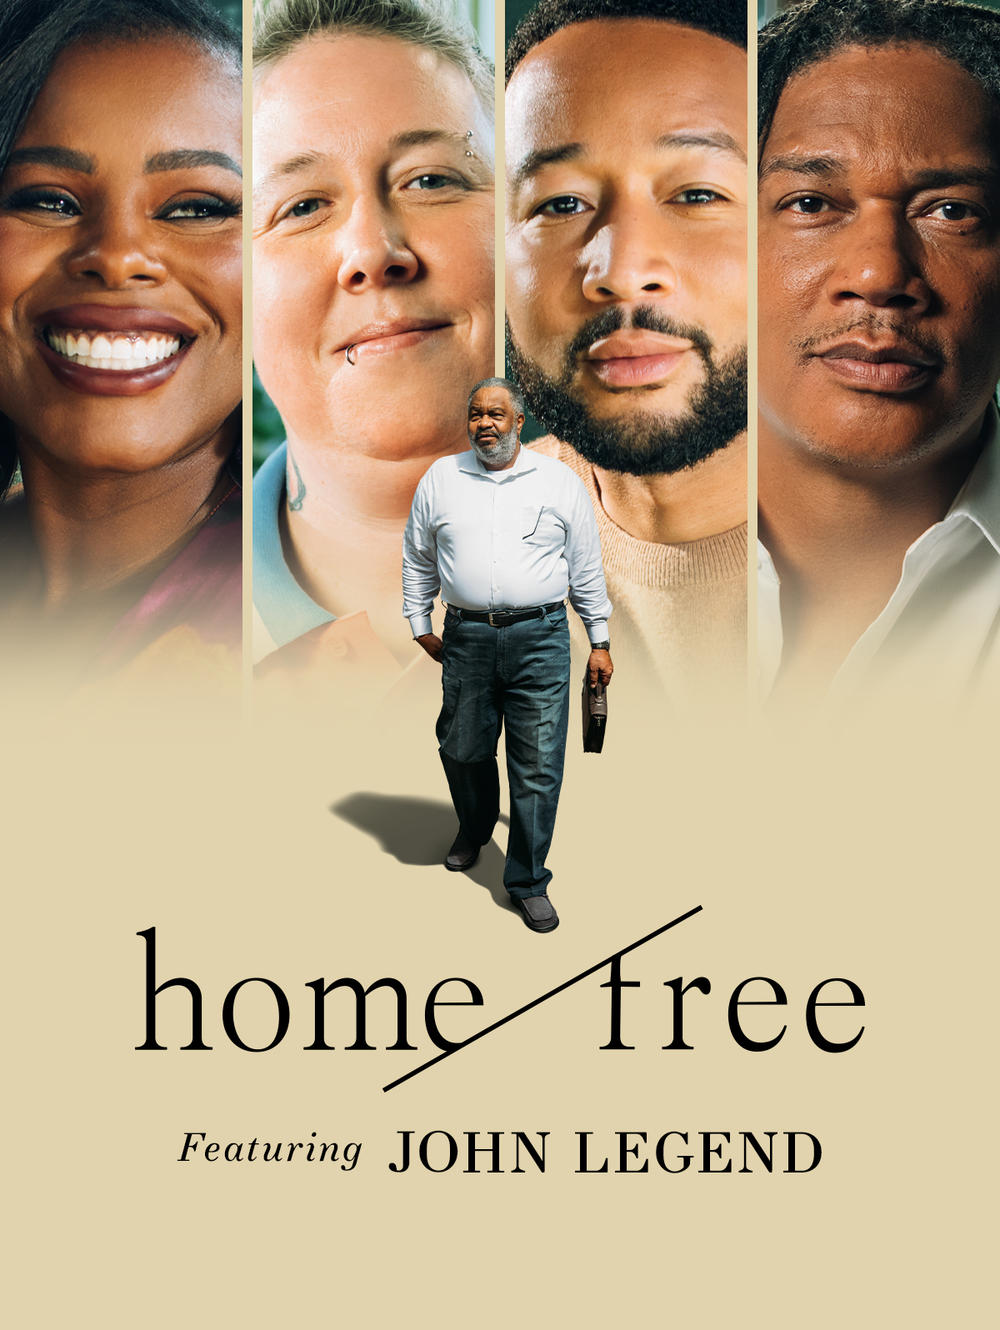 Movie poster for HOME/FREE, a short documentary that sheds light on the unseen obstacles individuals face after incarceration.